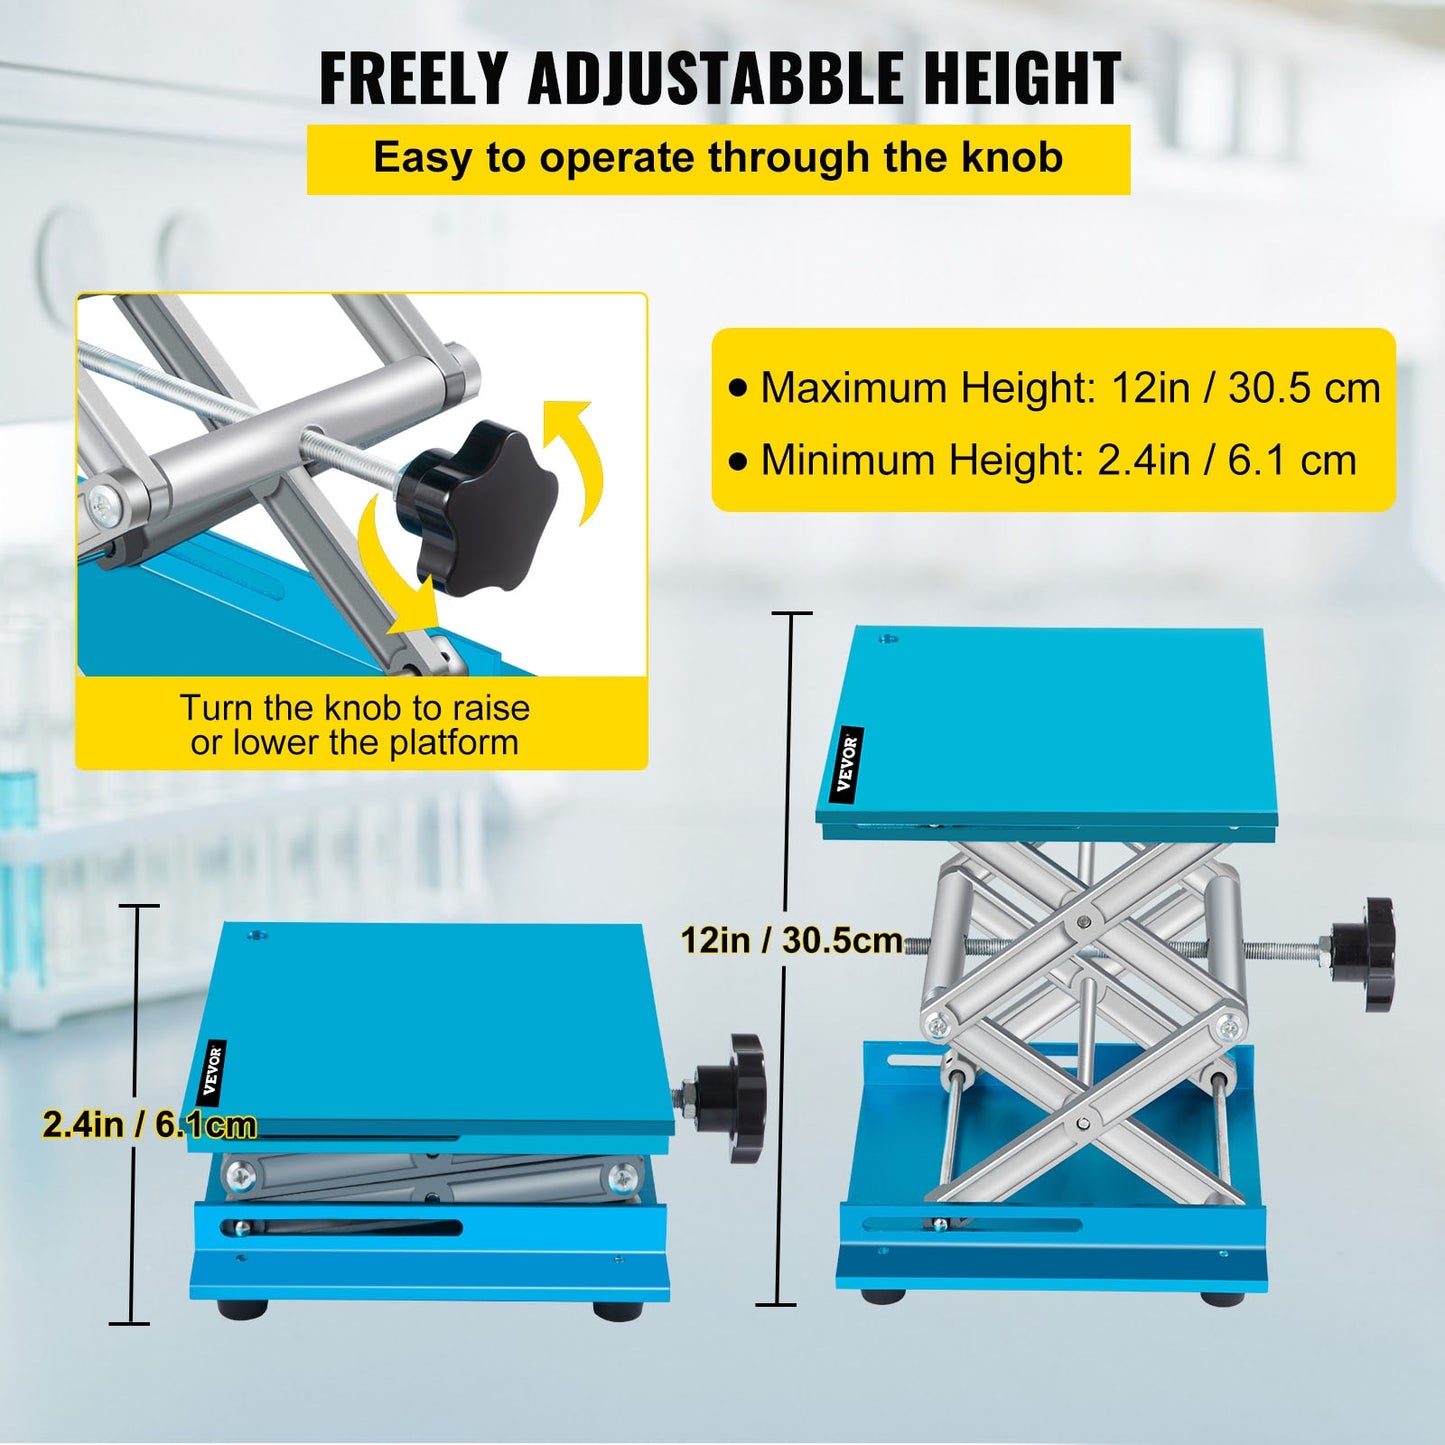 8"X8" Aluminum Laboratory Jack: Precision-Adjustable Lifter Platform for Elevated Workbench Versatility in Carpentry and Lab Settings